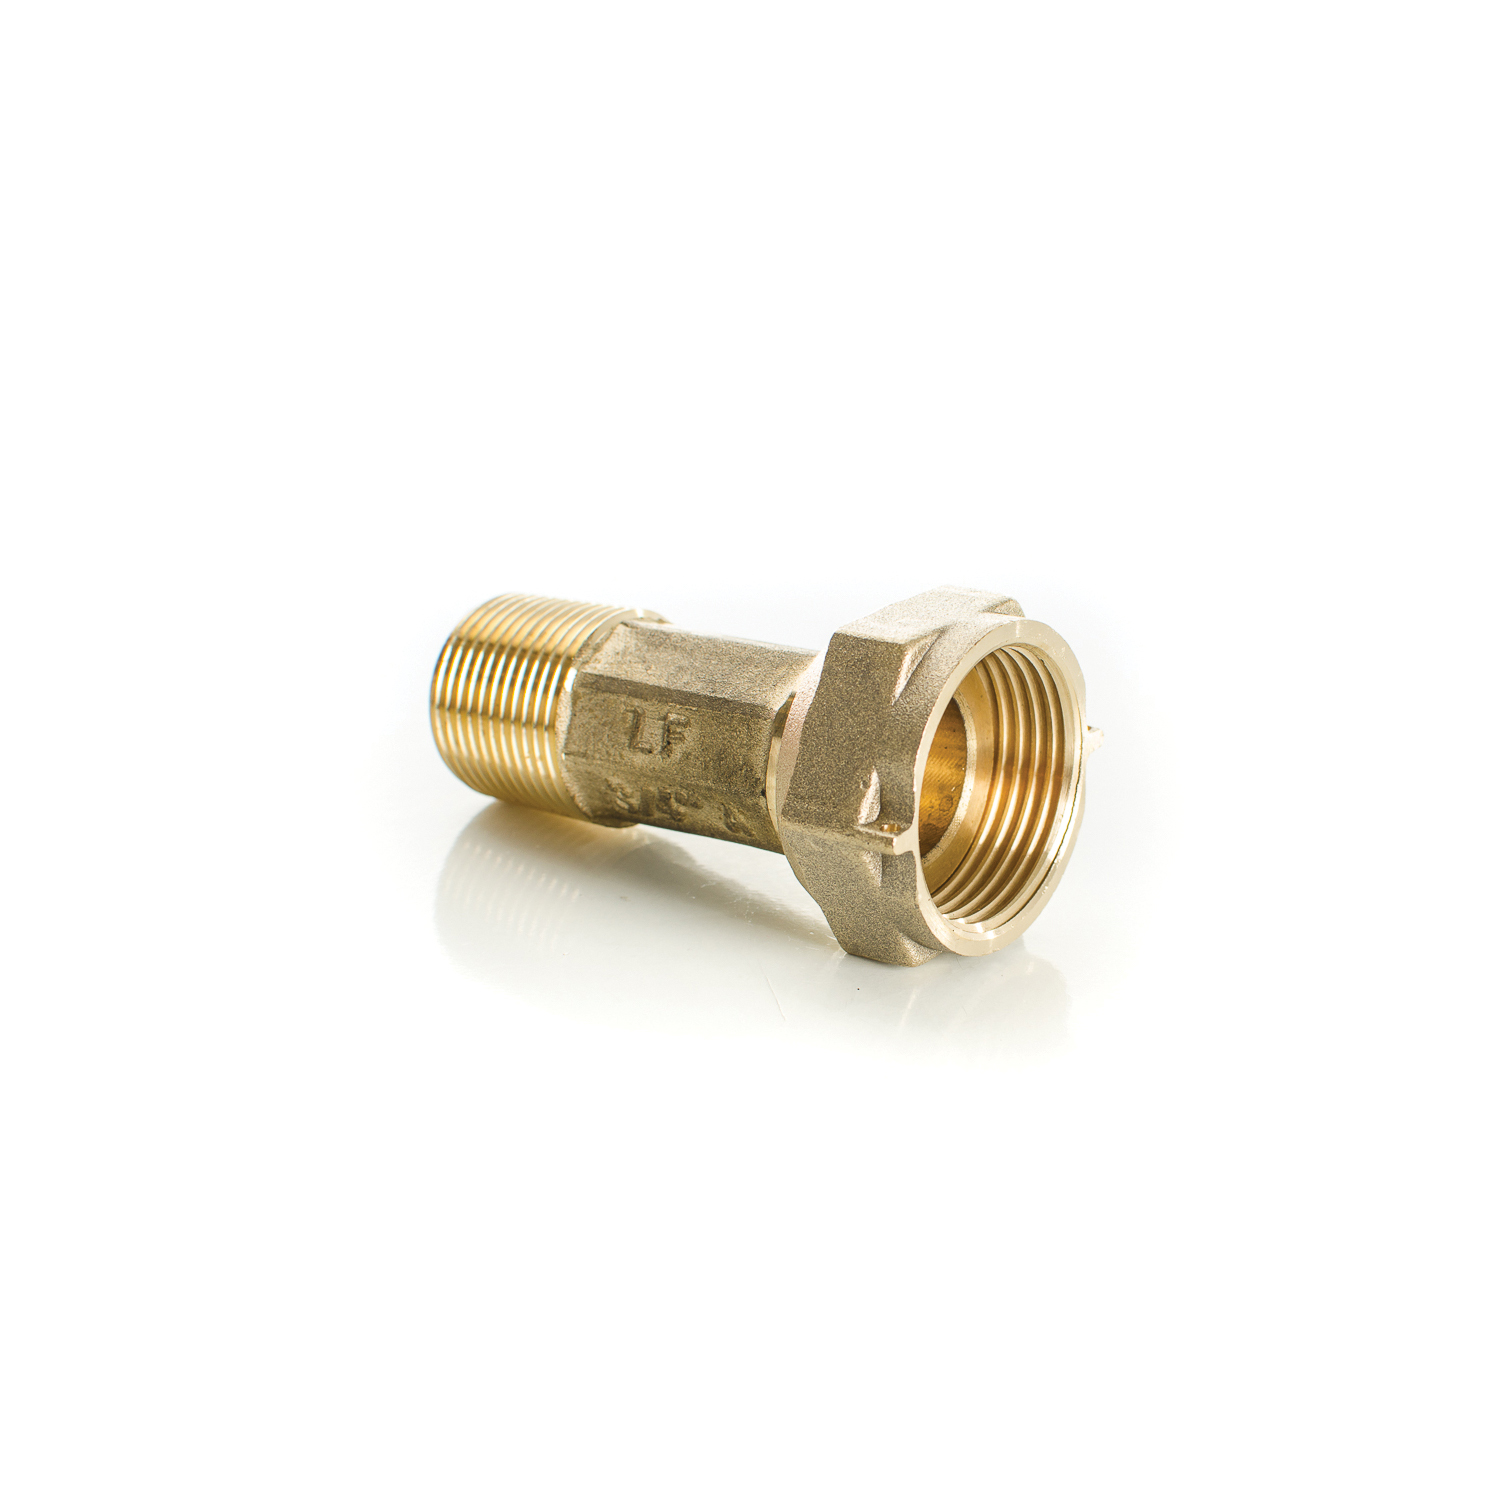 PASCO 7601 Water Meter Coupling With Washer, 1 x 3/4 in Nominal, MNPT x FNPT End Style, Brass